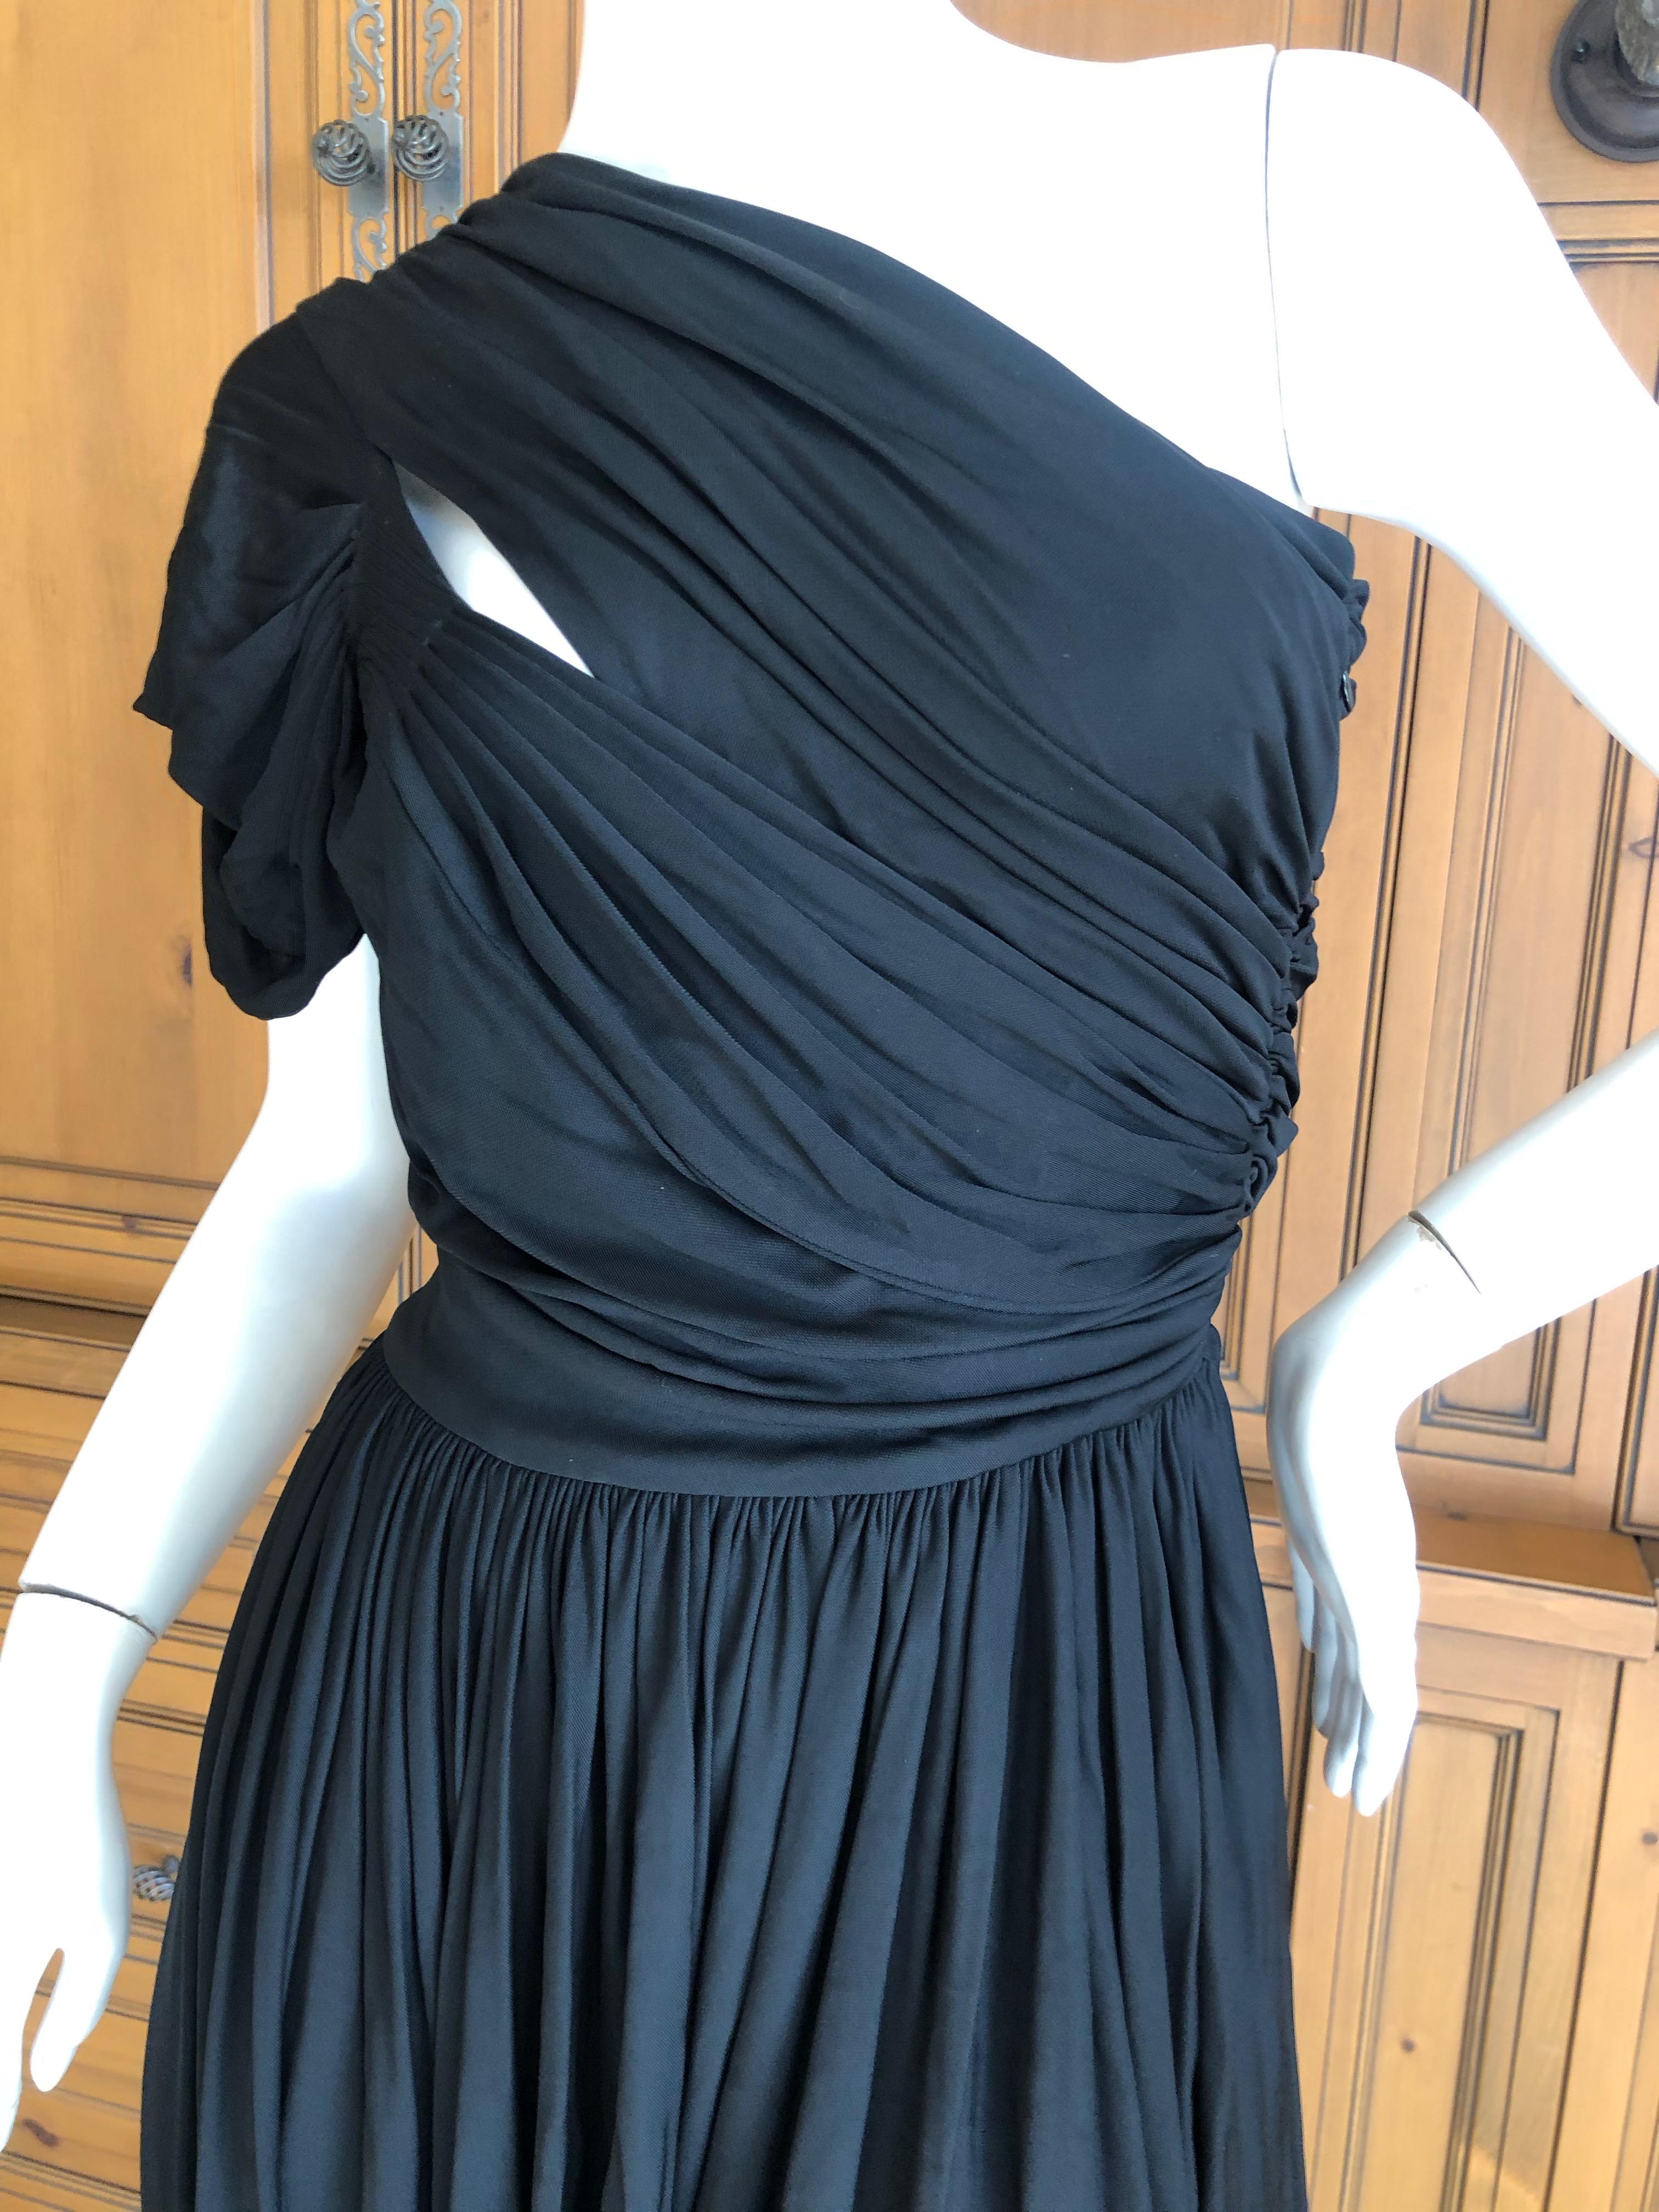 John Galliano Vintage Grecian One Shoulder Little Black Dress with Keyhole In New Condition For Sale In Cloverdale, CA